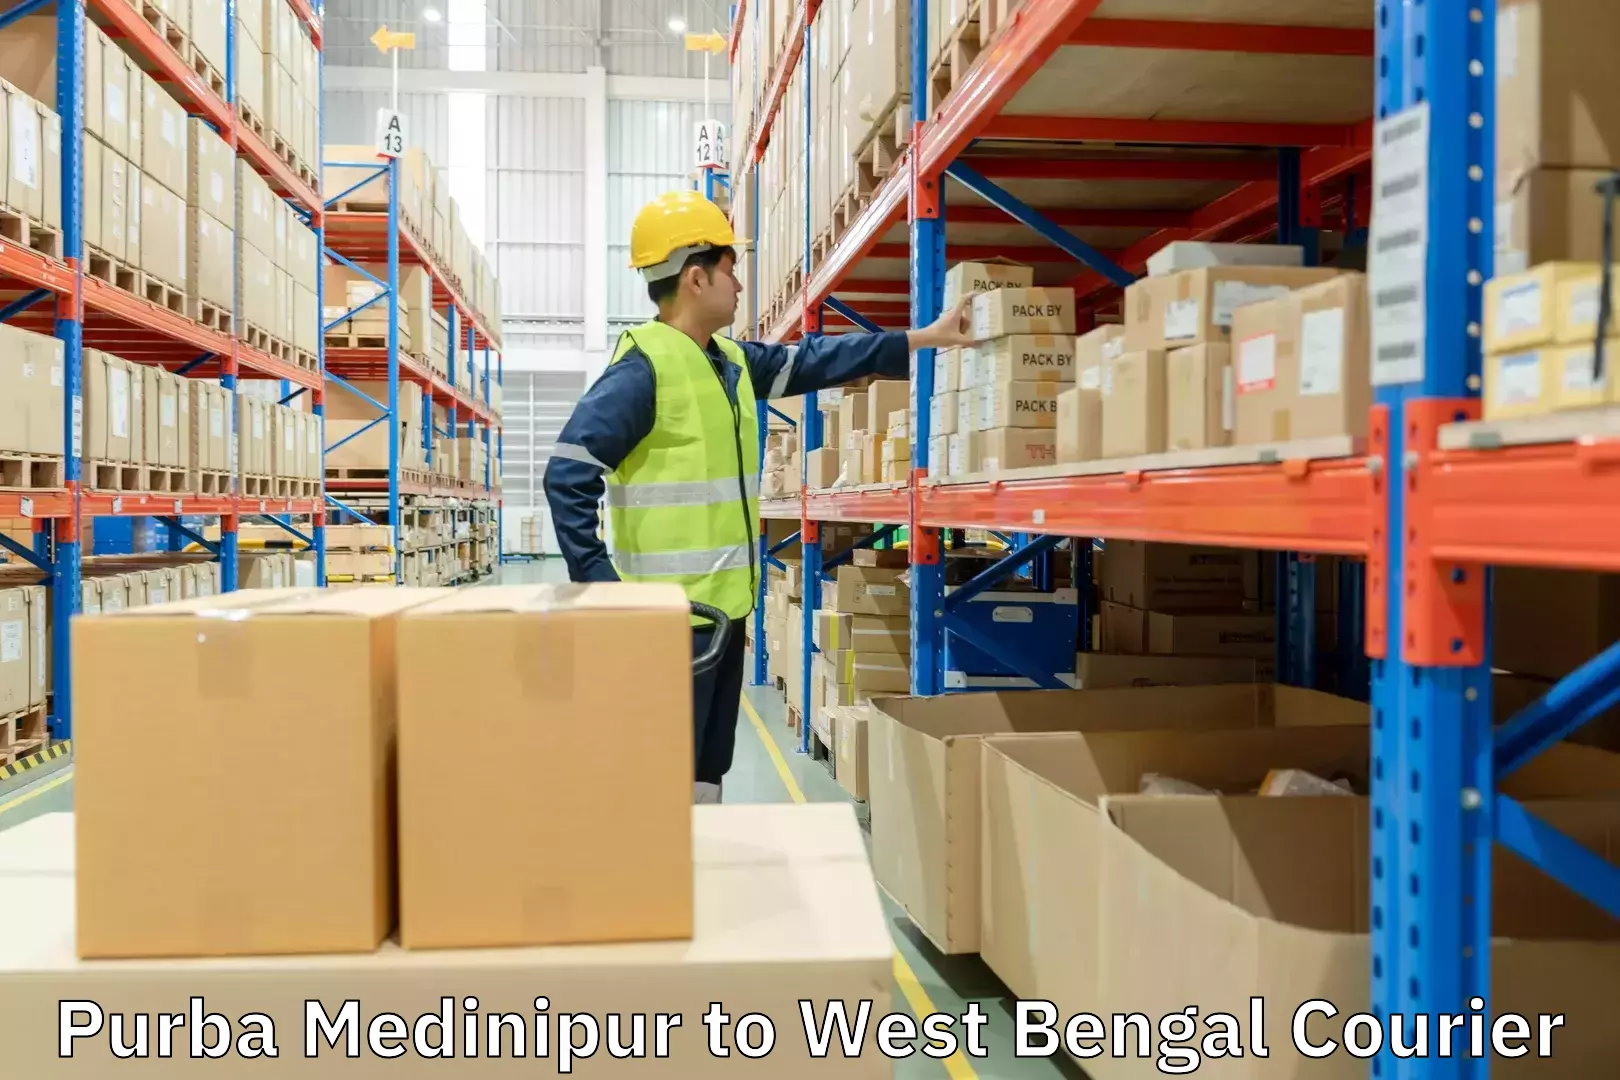 Sustainable delivery practices Purba Medinipur to West Bengal